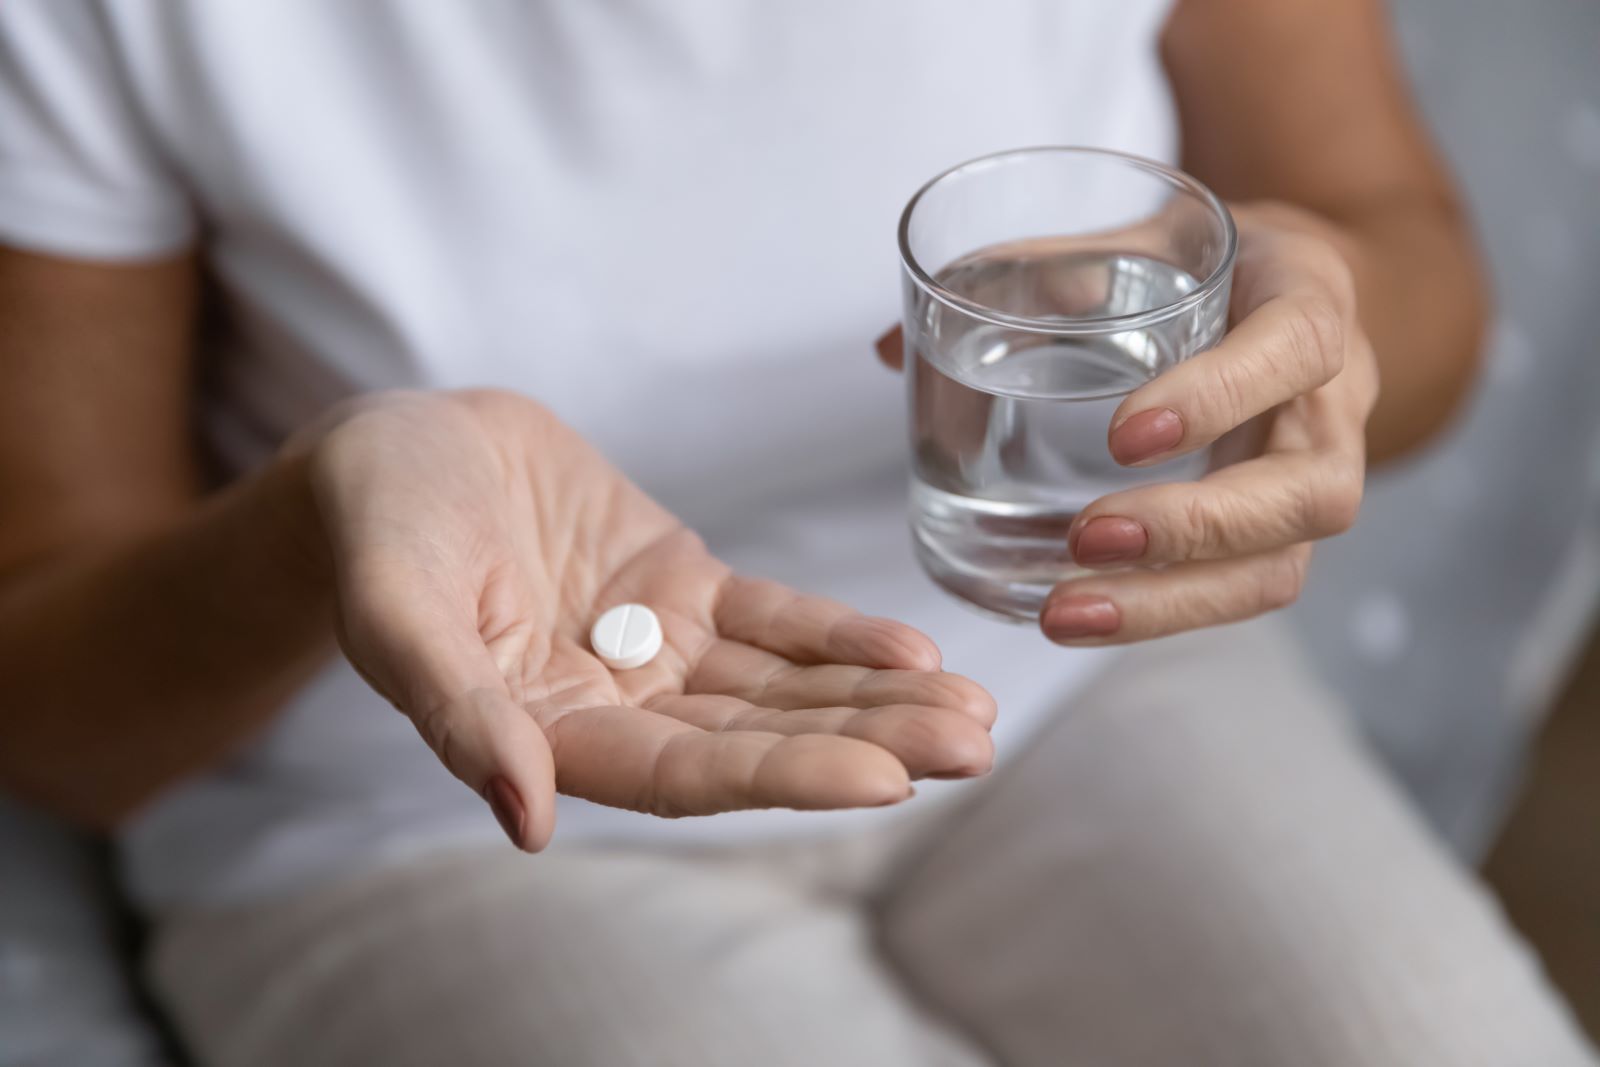 Updated Guidance Discourages Daily Aspirin for Some Populations